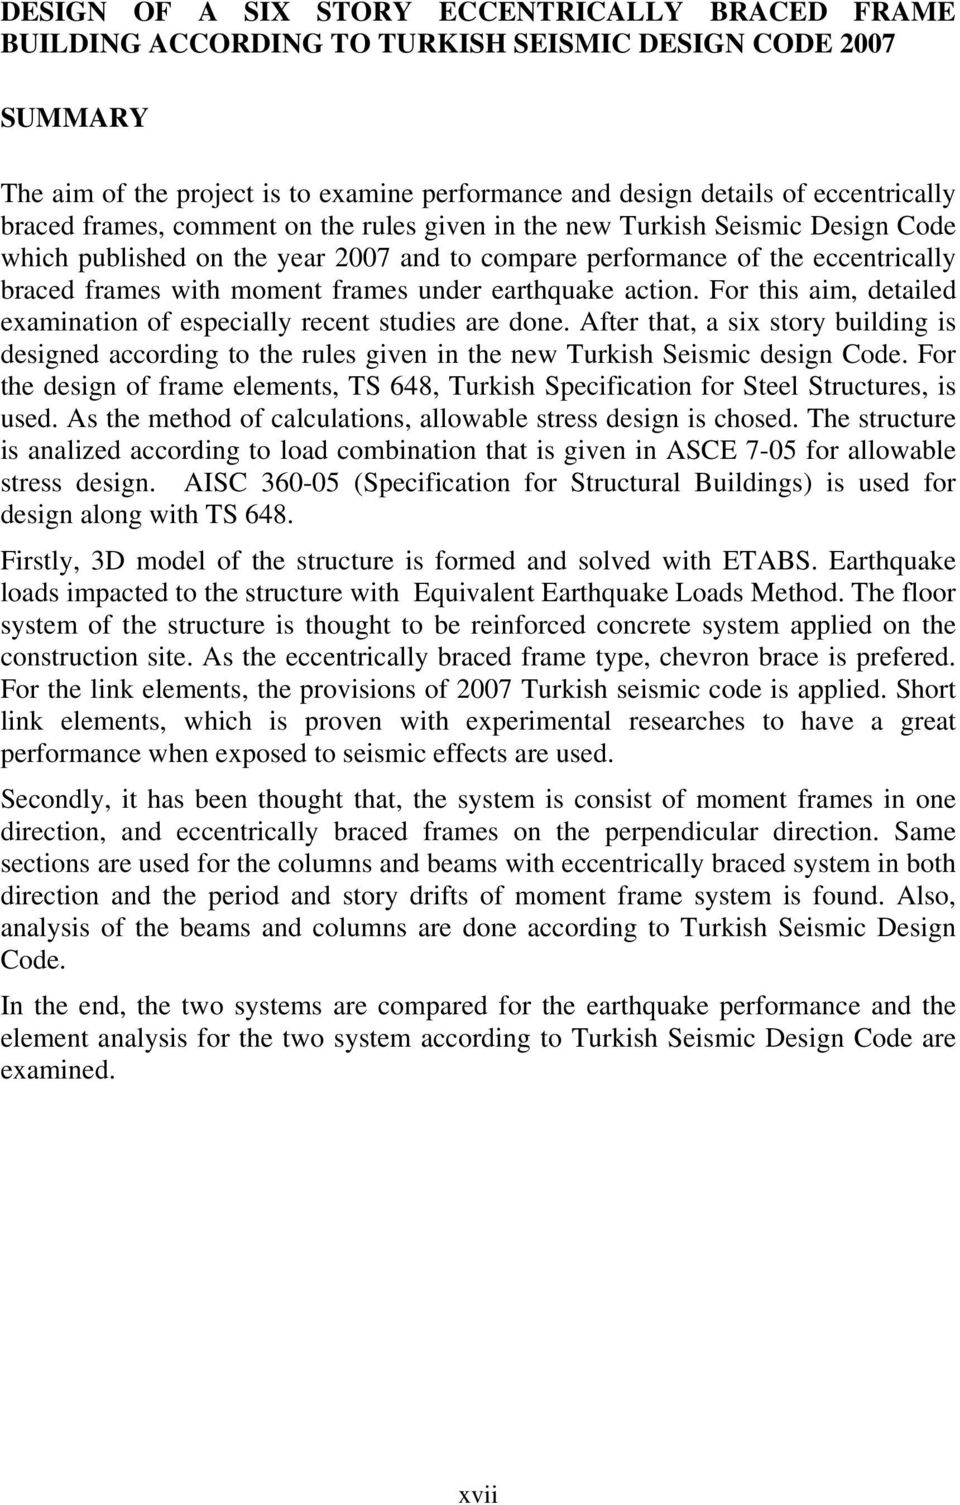 earthquake action. For this aim, detailed examination of especiall recent studies are done.